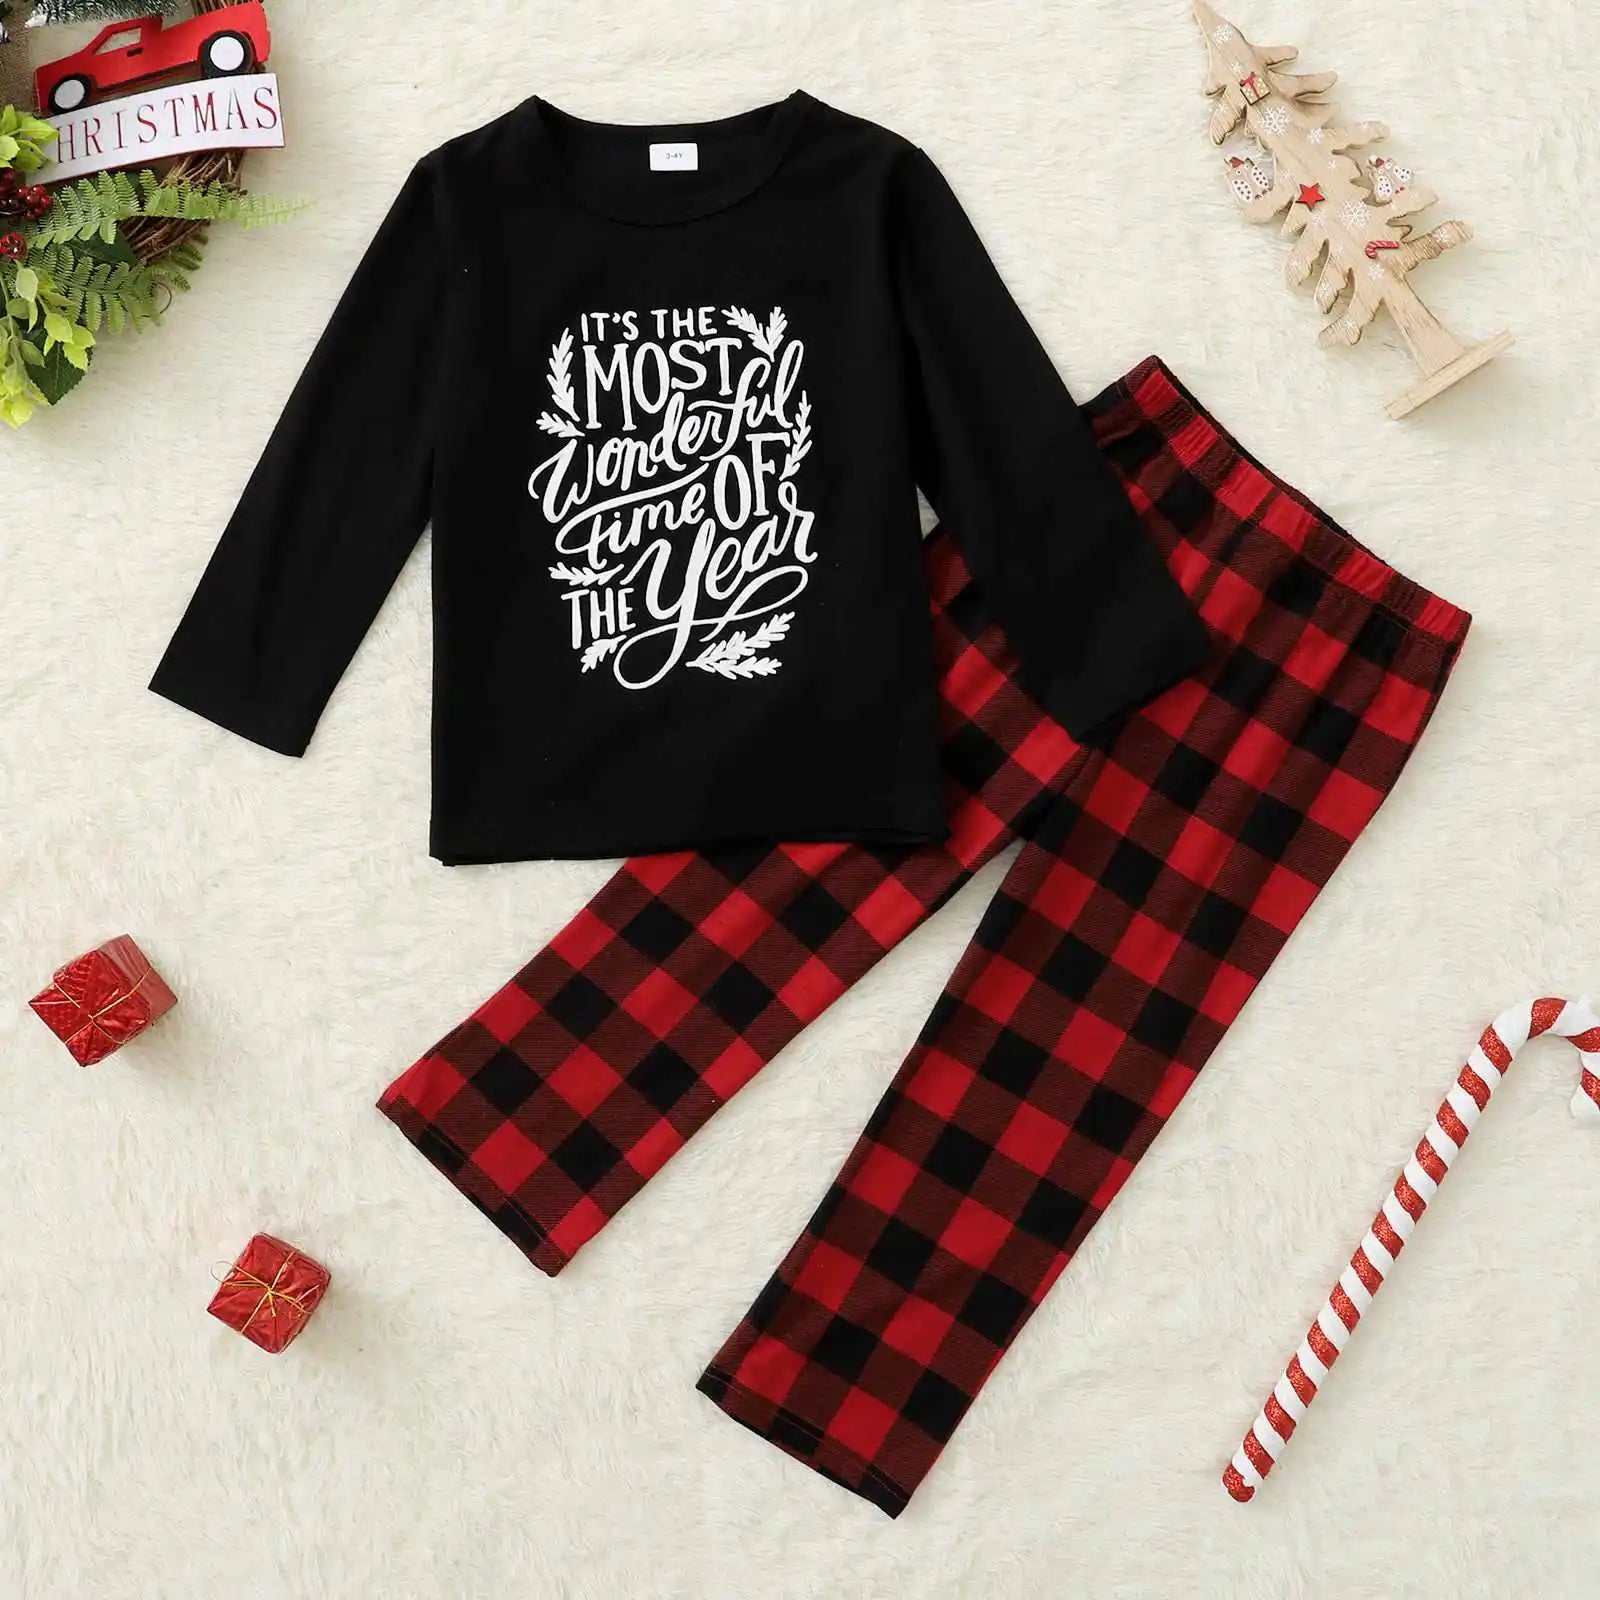 Custom Family Pajamas Best Christmas Pajamas Holiday Matching outfit for Family Sleepwear Homewear for Baby Kids Mom Dad Catpapa